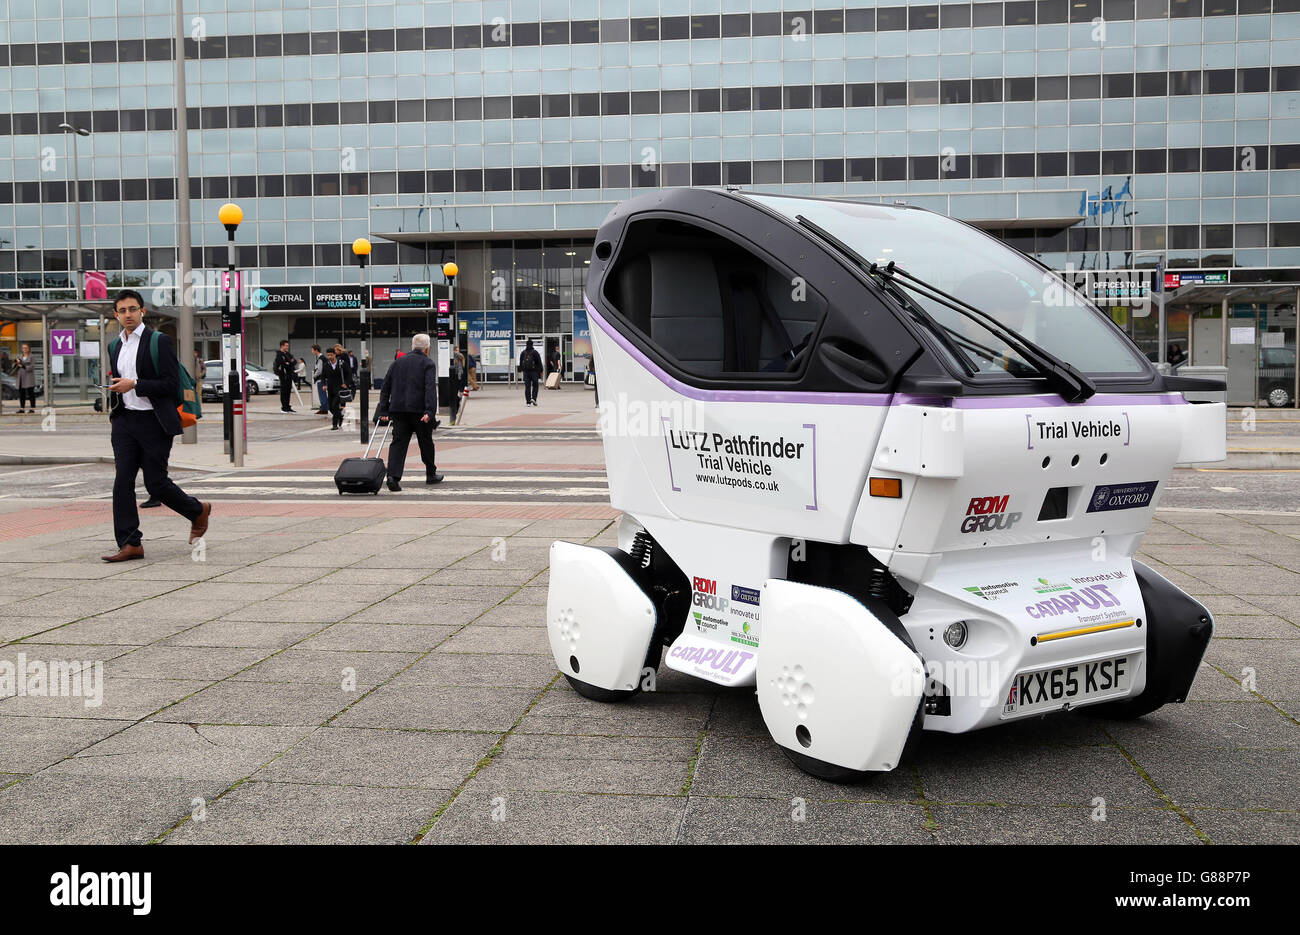 The UK's Transport Systems Catapult unveils its first LUTZ Pathfinder pod vehicle to commuters outside Milton Keynes Central train station, as part of a project trialling self-driving technology in pedestrianised areas. Stock Photo